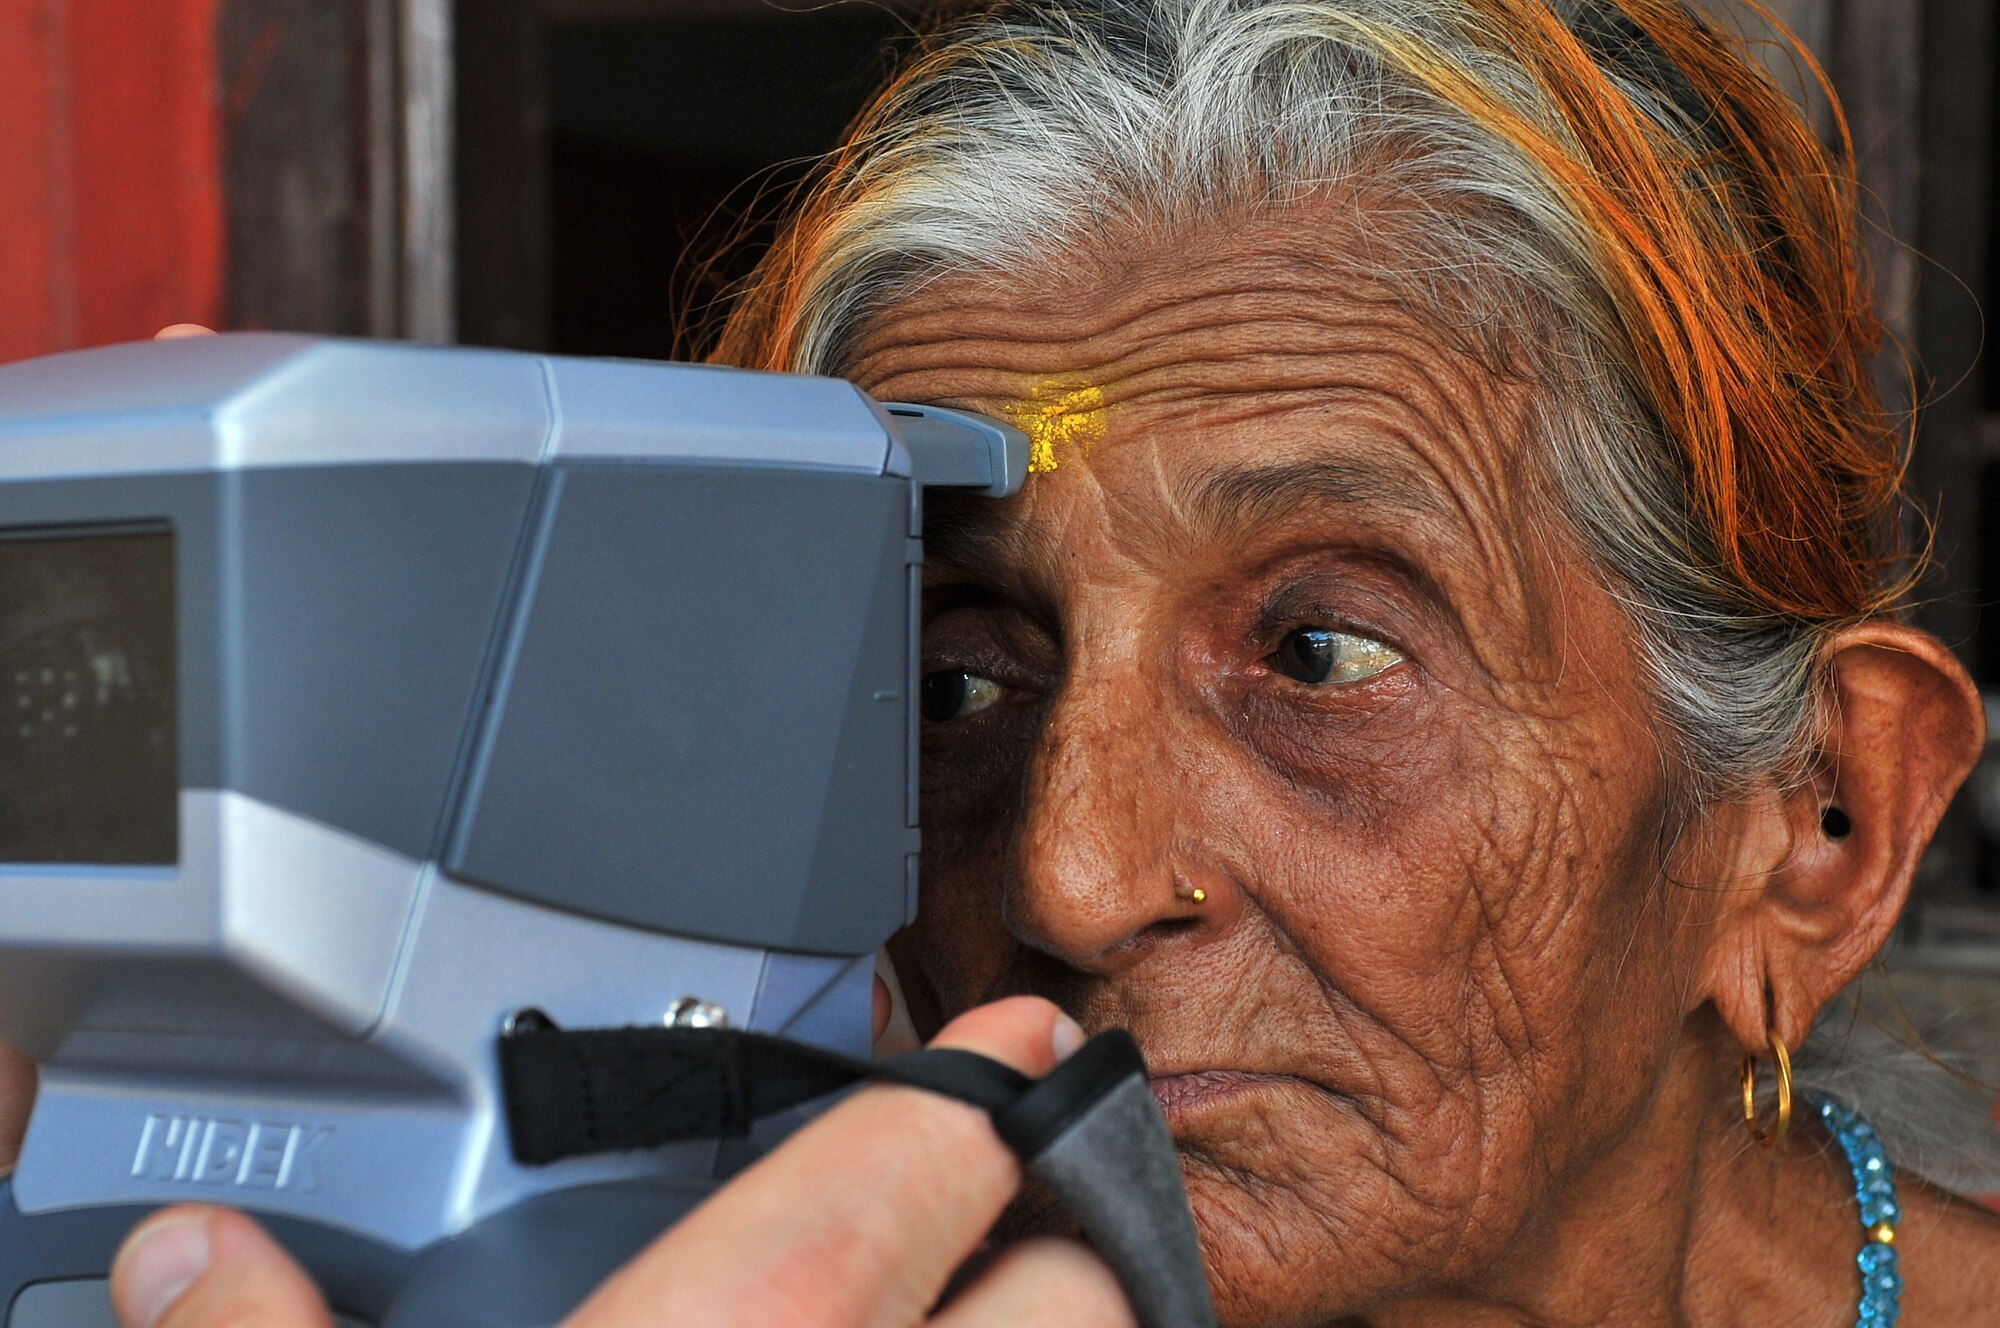 U.S. Air Force Master Sgt. Robert Shaw, Operation Pacific Angel-Nepal optometry technician, performs an auto refraction screening on a patient at a health services outreach site in Manahari, Nepal, Sept. 8, 2014. PACANGEL supports U.S. Pacific Command’s capacity-building efforts by partnering with other governments, non-governmental agencies and multilateral militaries in the respective region to provide medical, dental, optometry and engineering assistance to their citizens. (U.S. Air Force photo by Staff Sgt. Melissa B. White/Released)